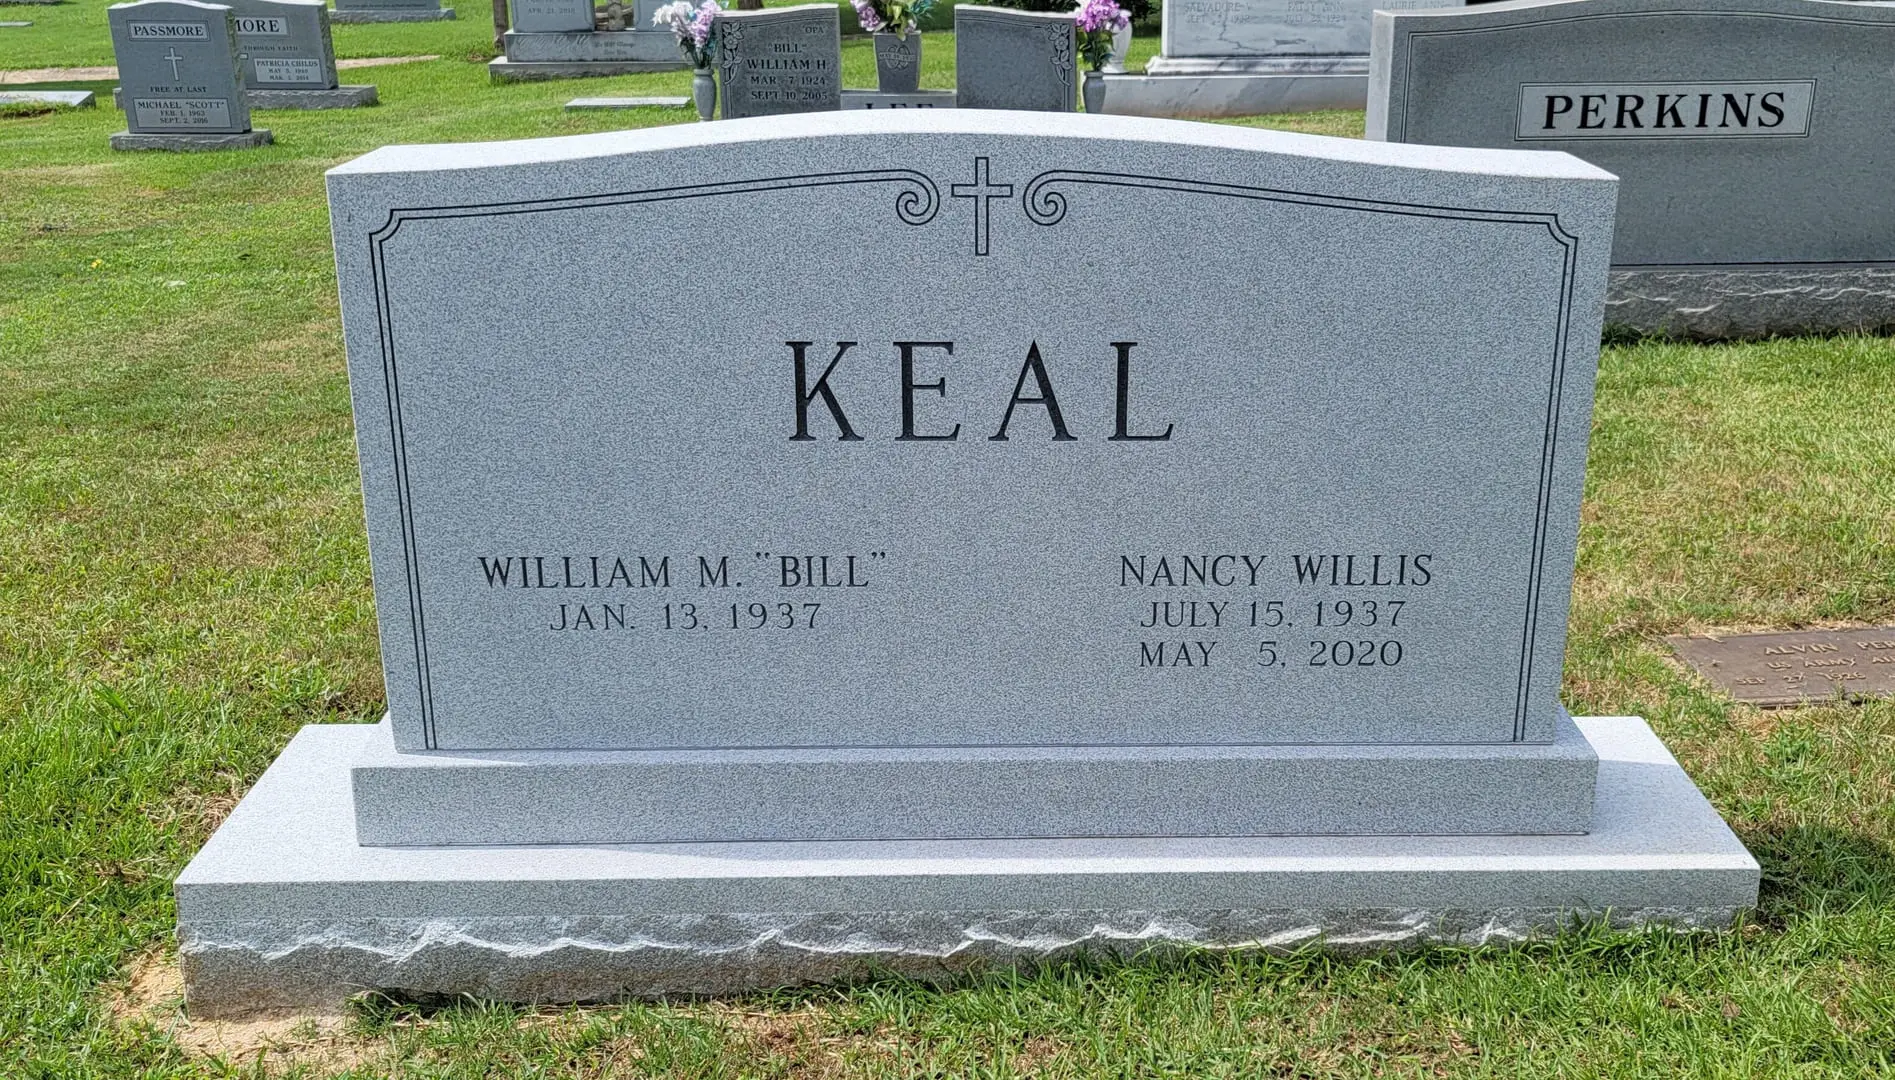 A memorial slab for Willian M. Bill and Nancy Willis